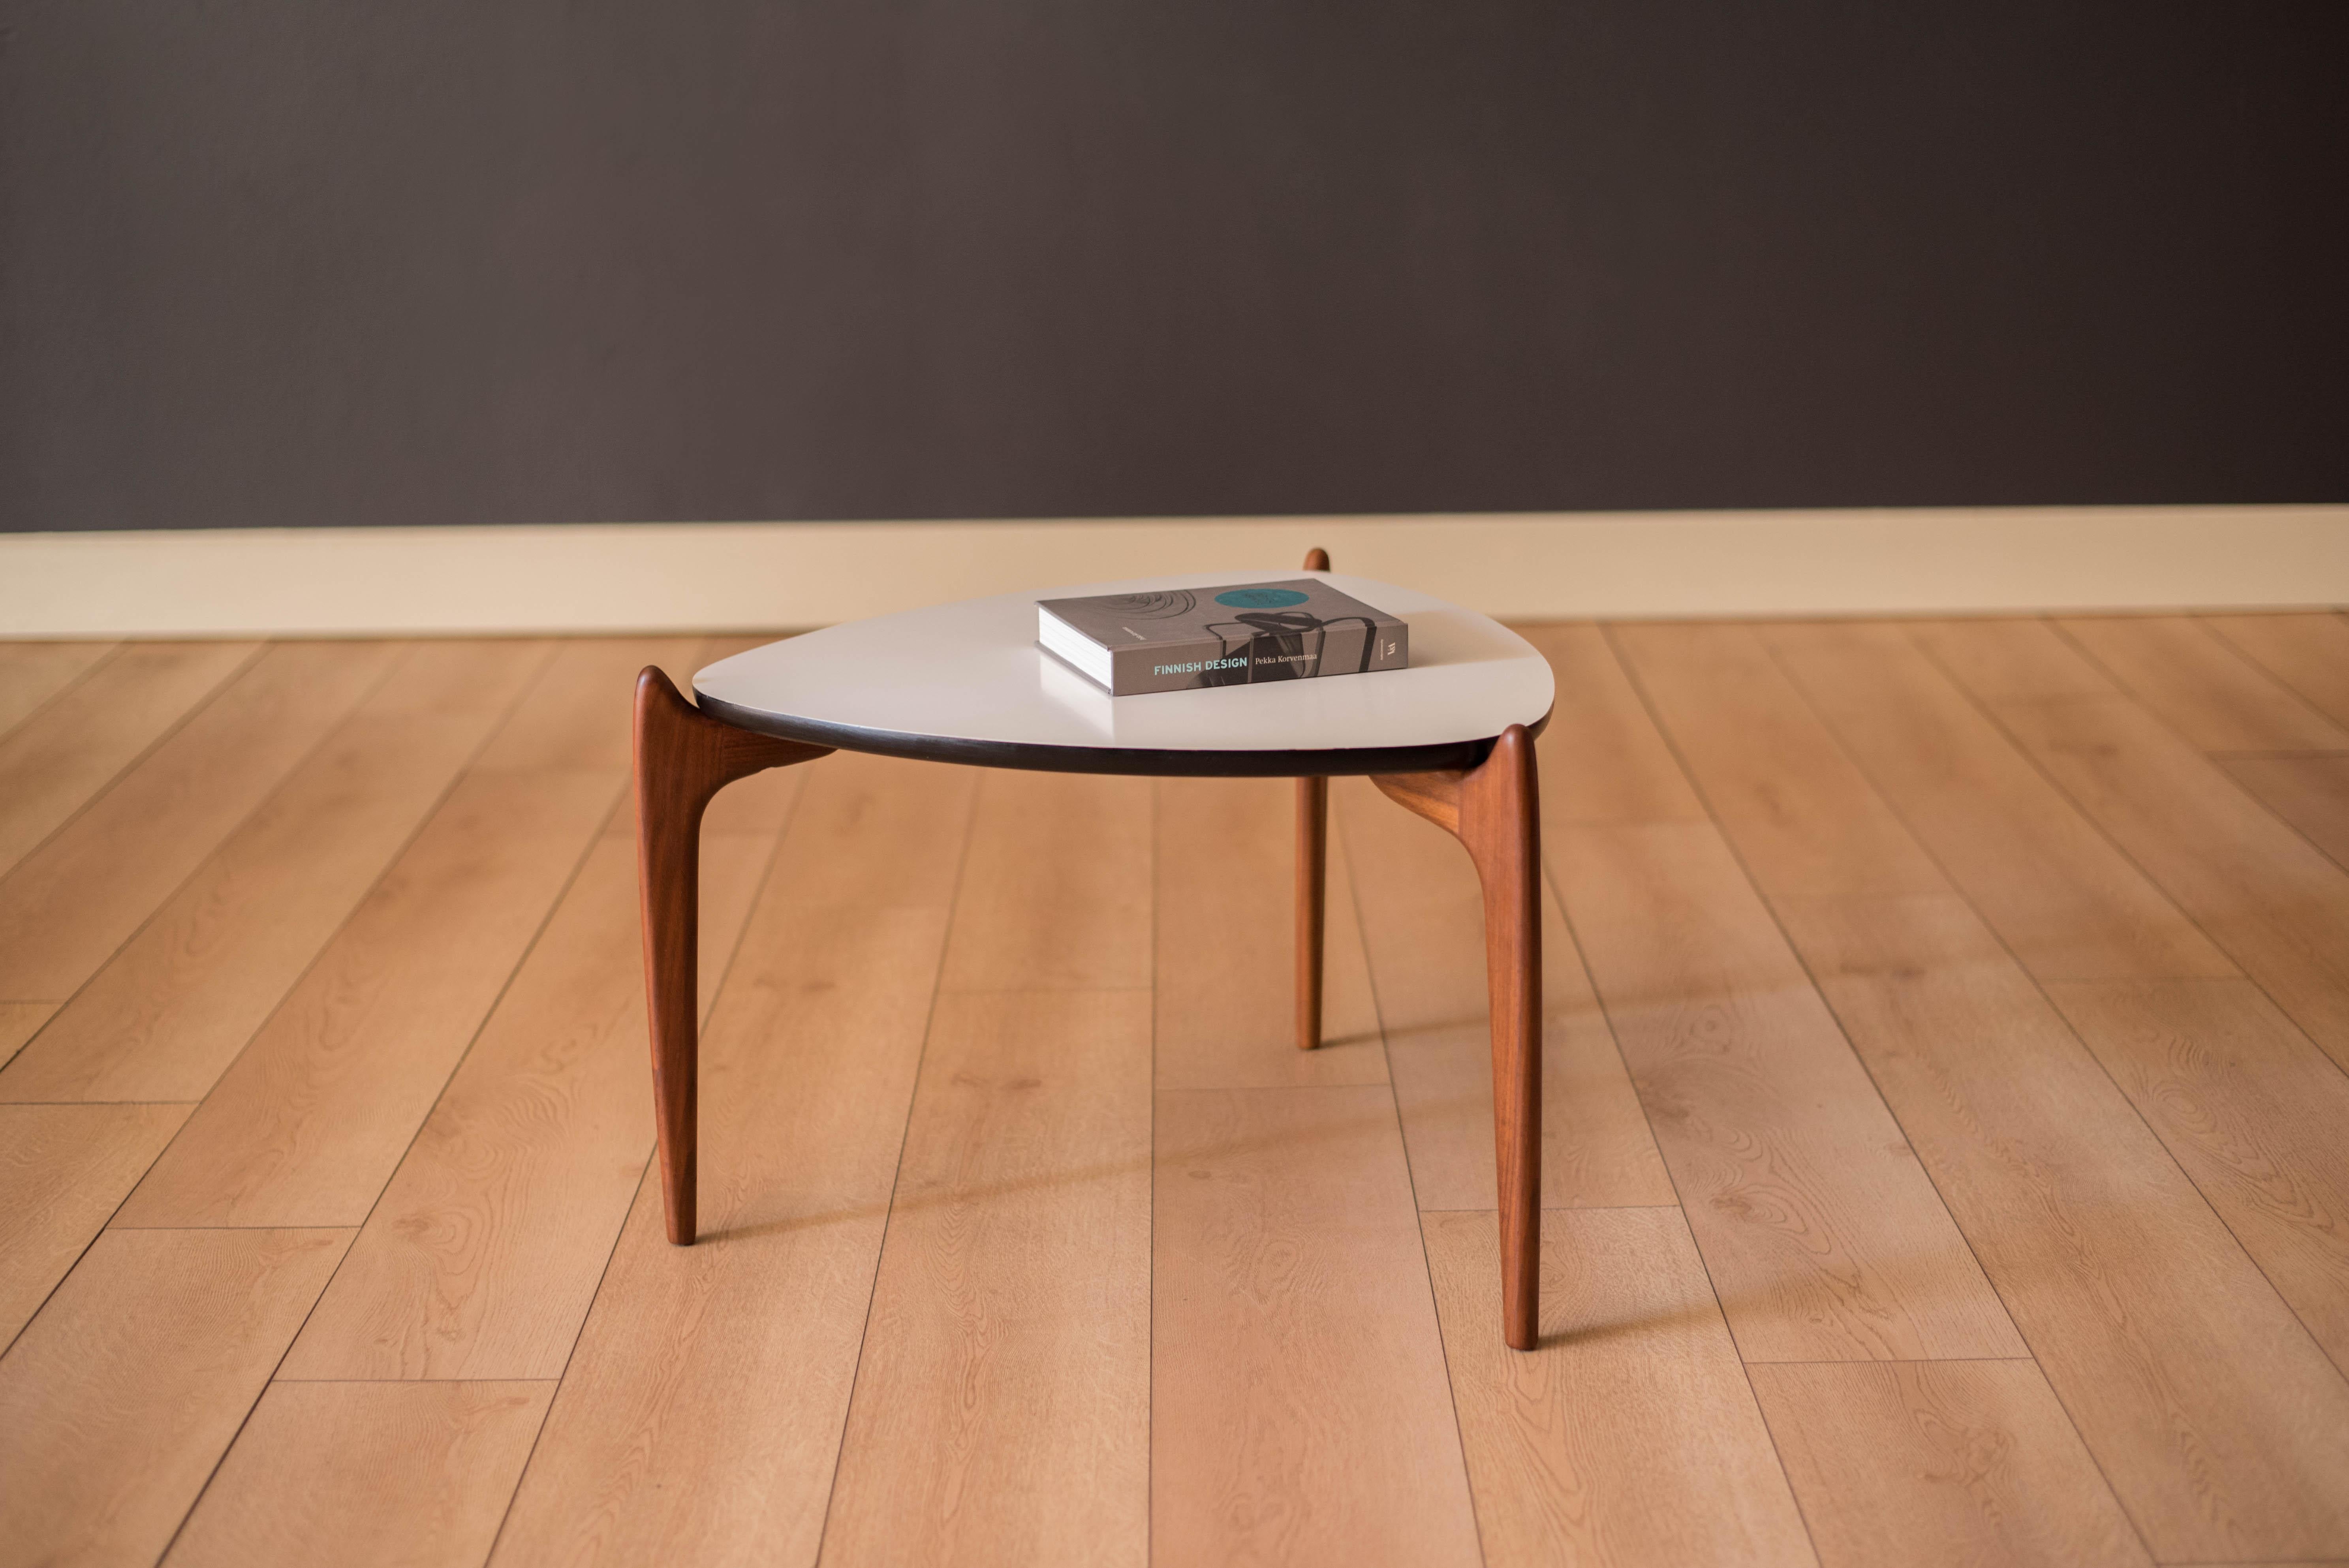 Mid-Century Modern occasional triangle coffee table or accent end table designed by Adrian Pearsall for Craft Associates, c. 1960's. This piece features a contrasting white laminate table top supported by three sculptural solid walnut legs. Easy to